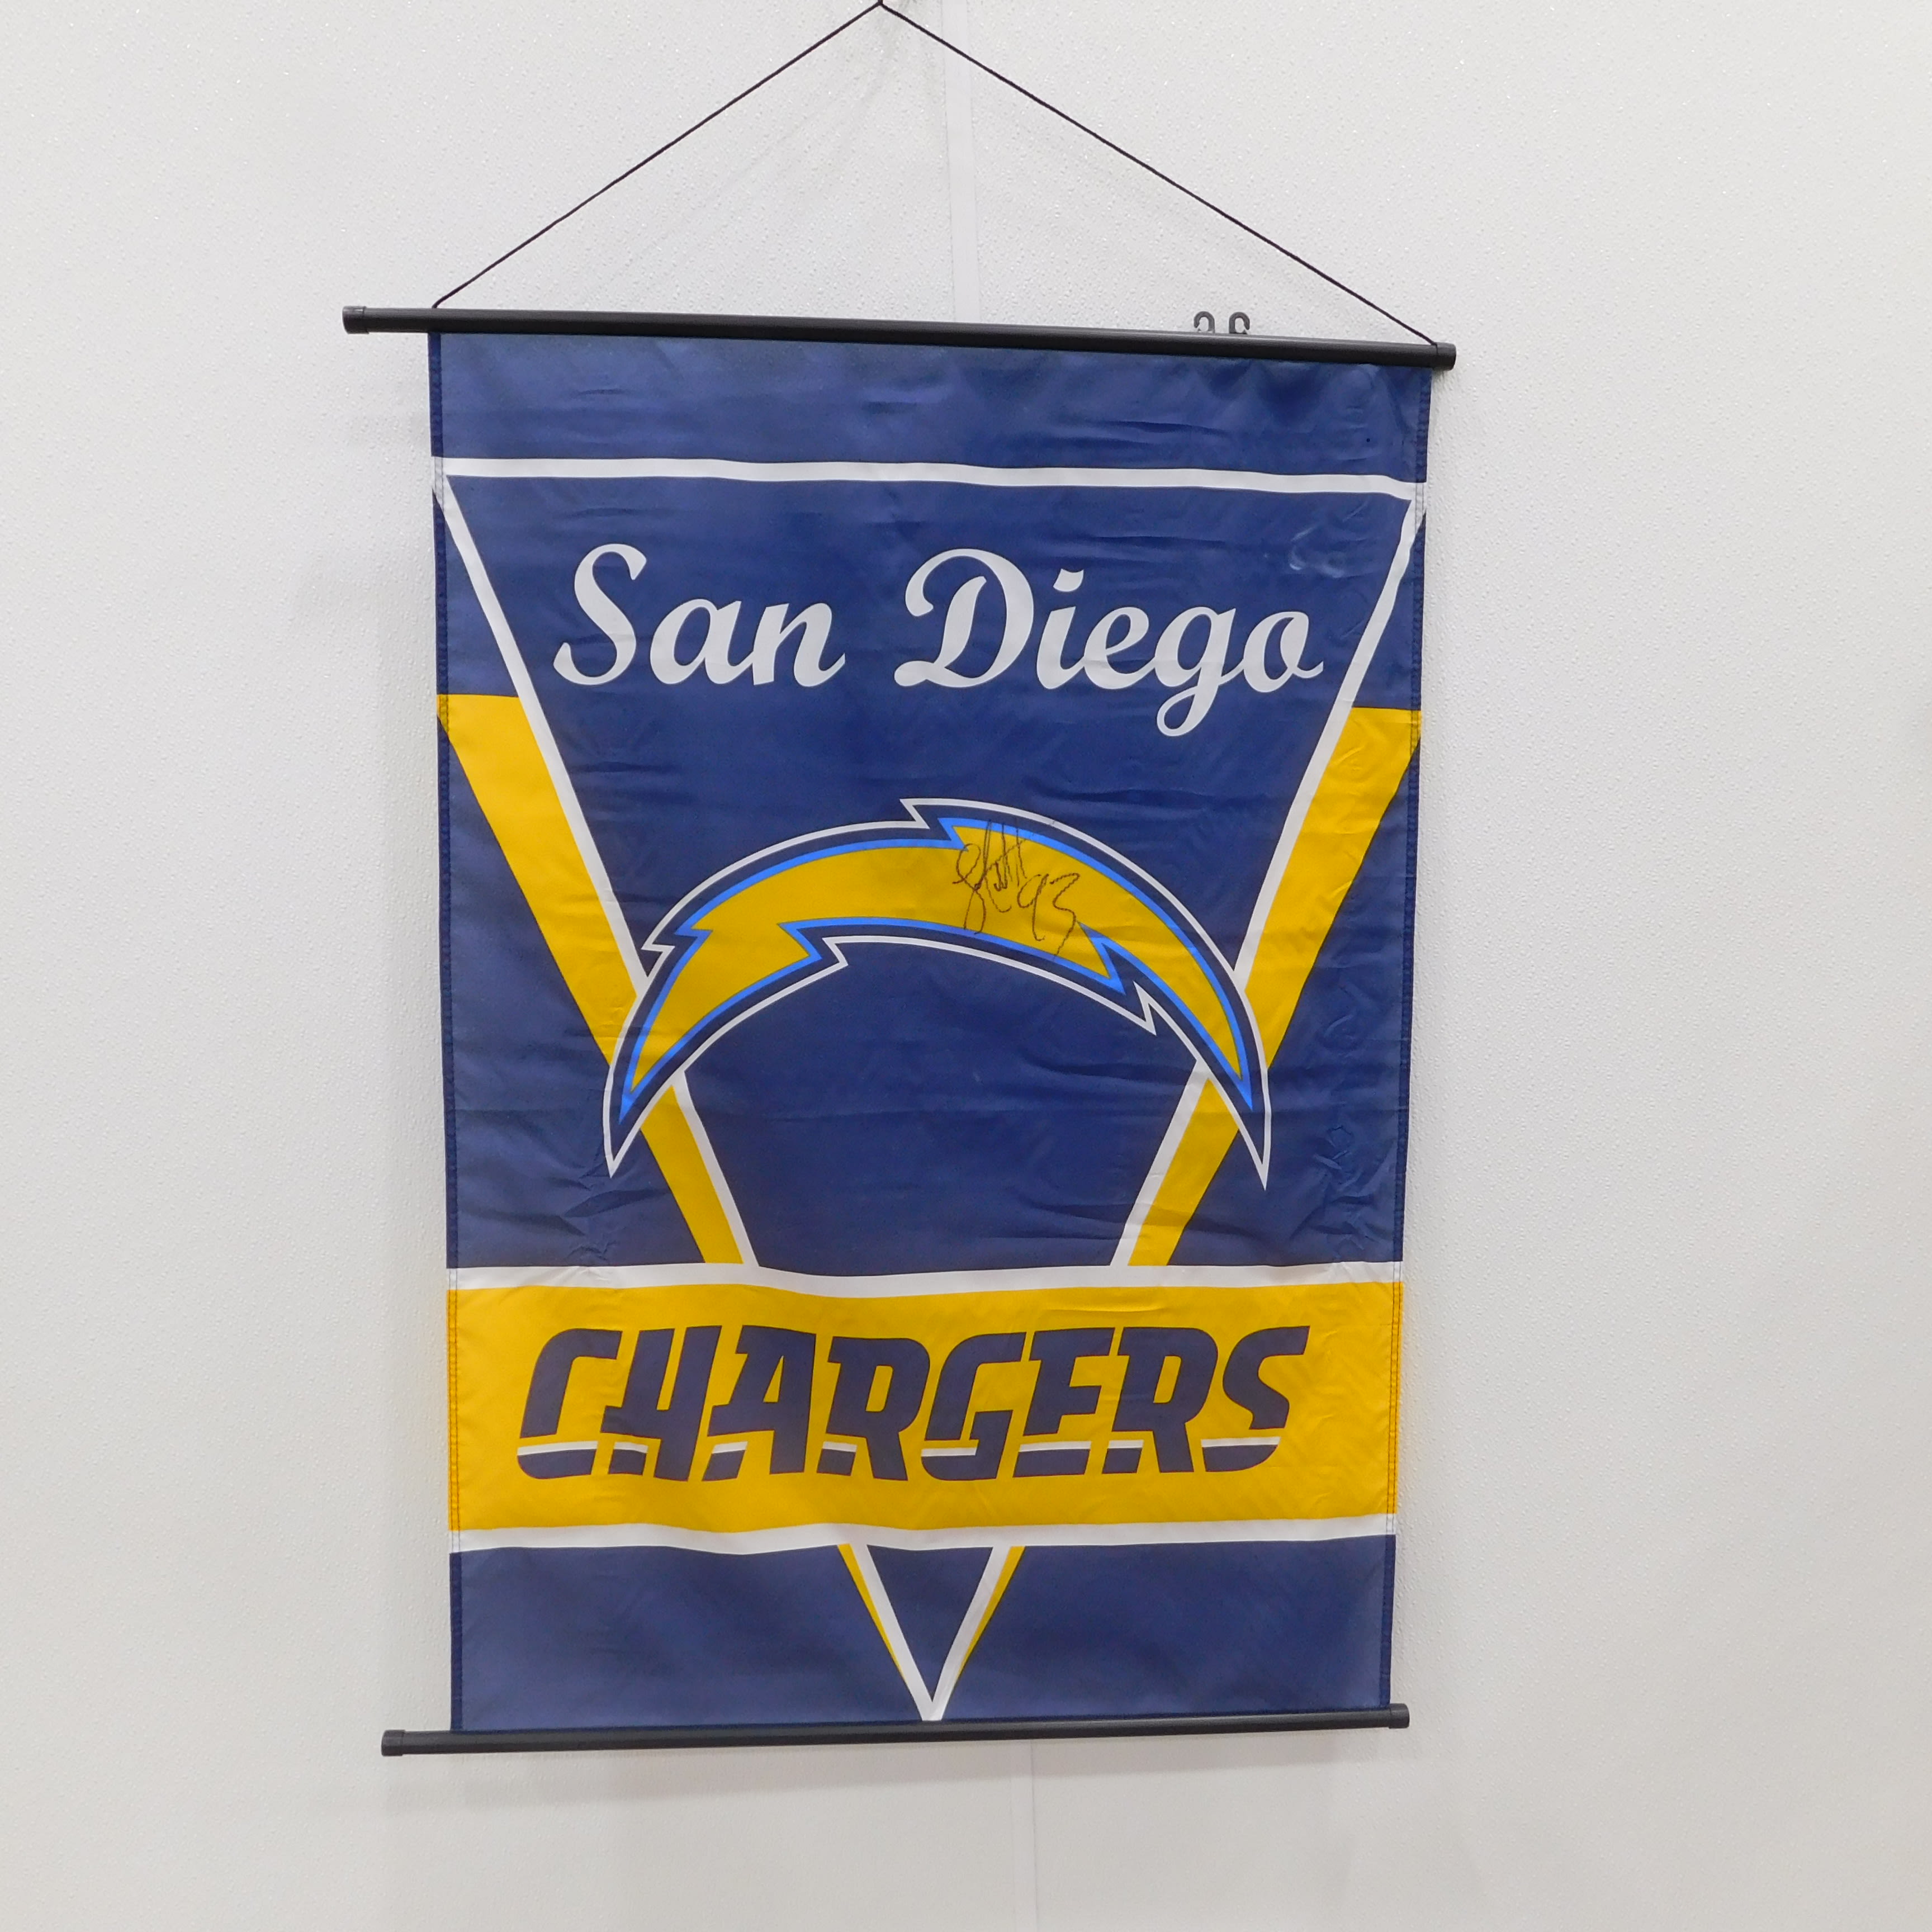 Buy the Luis Castillo Signed San Diego Chargers Banner